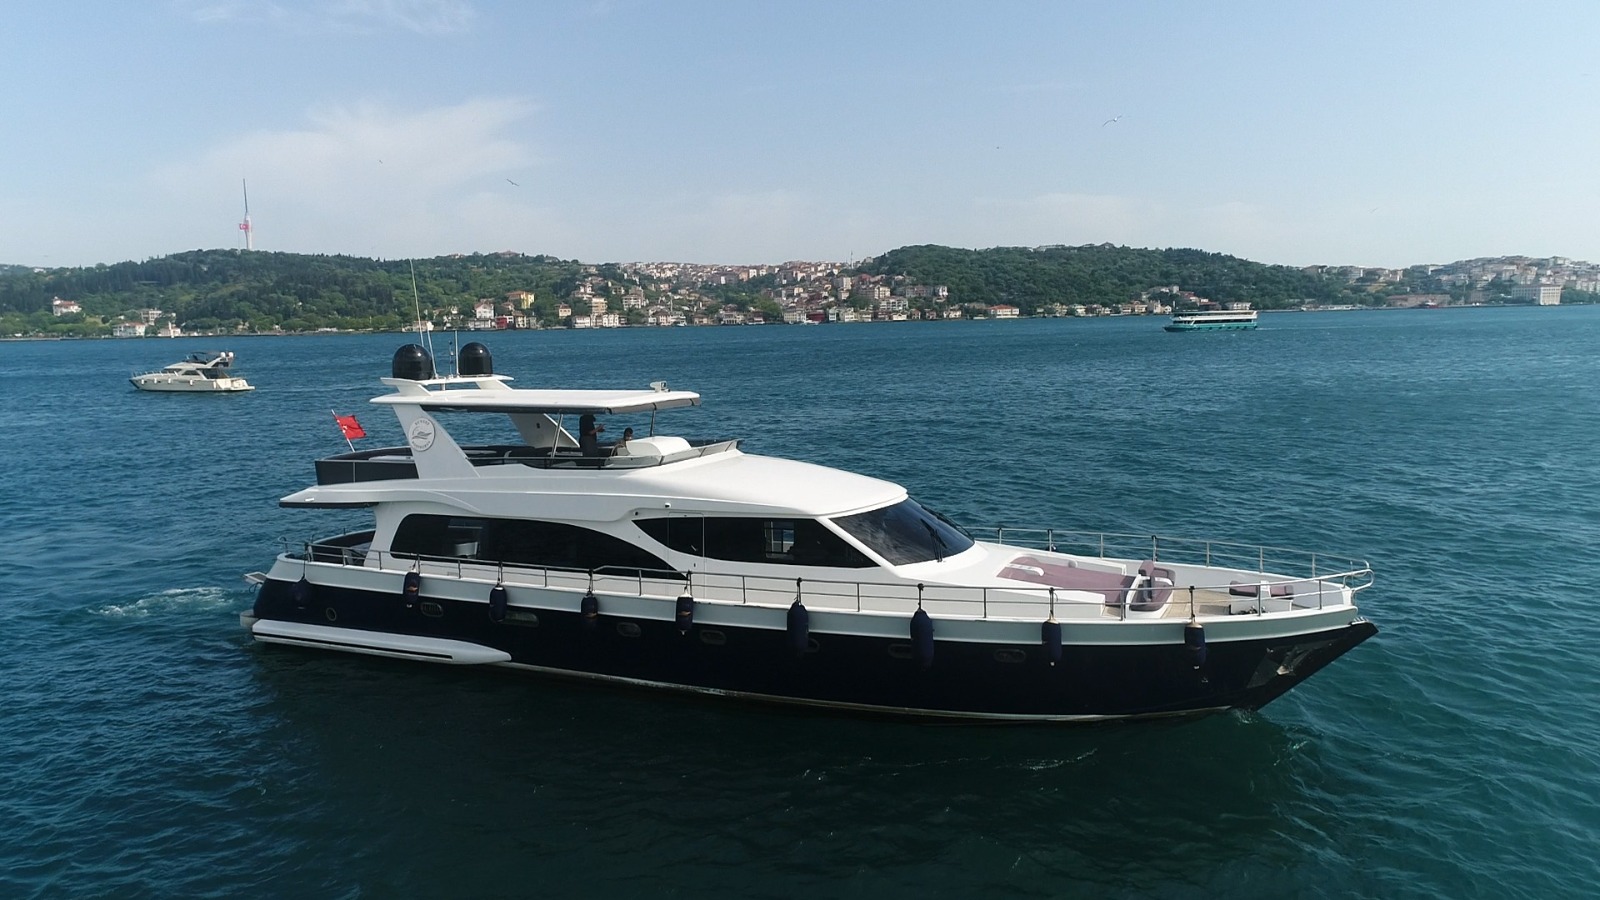 Private yacht boat on the Bosphorus and shores of the Istanbul